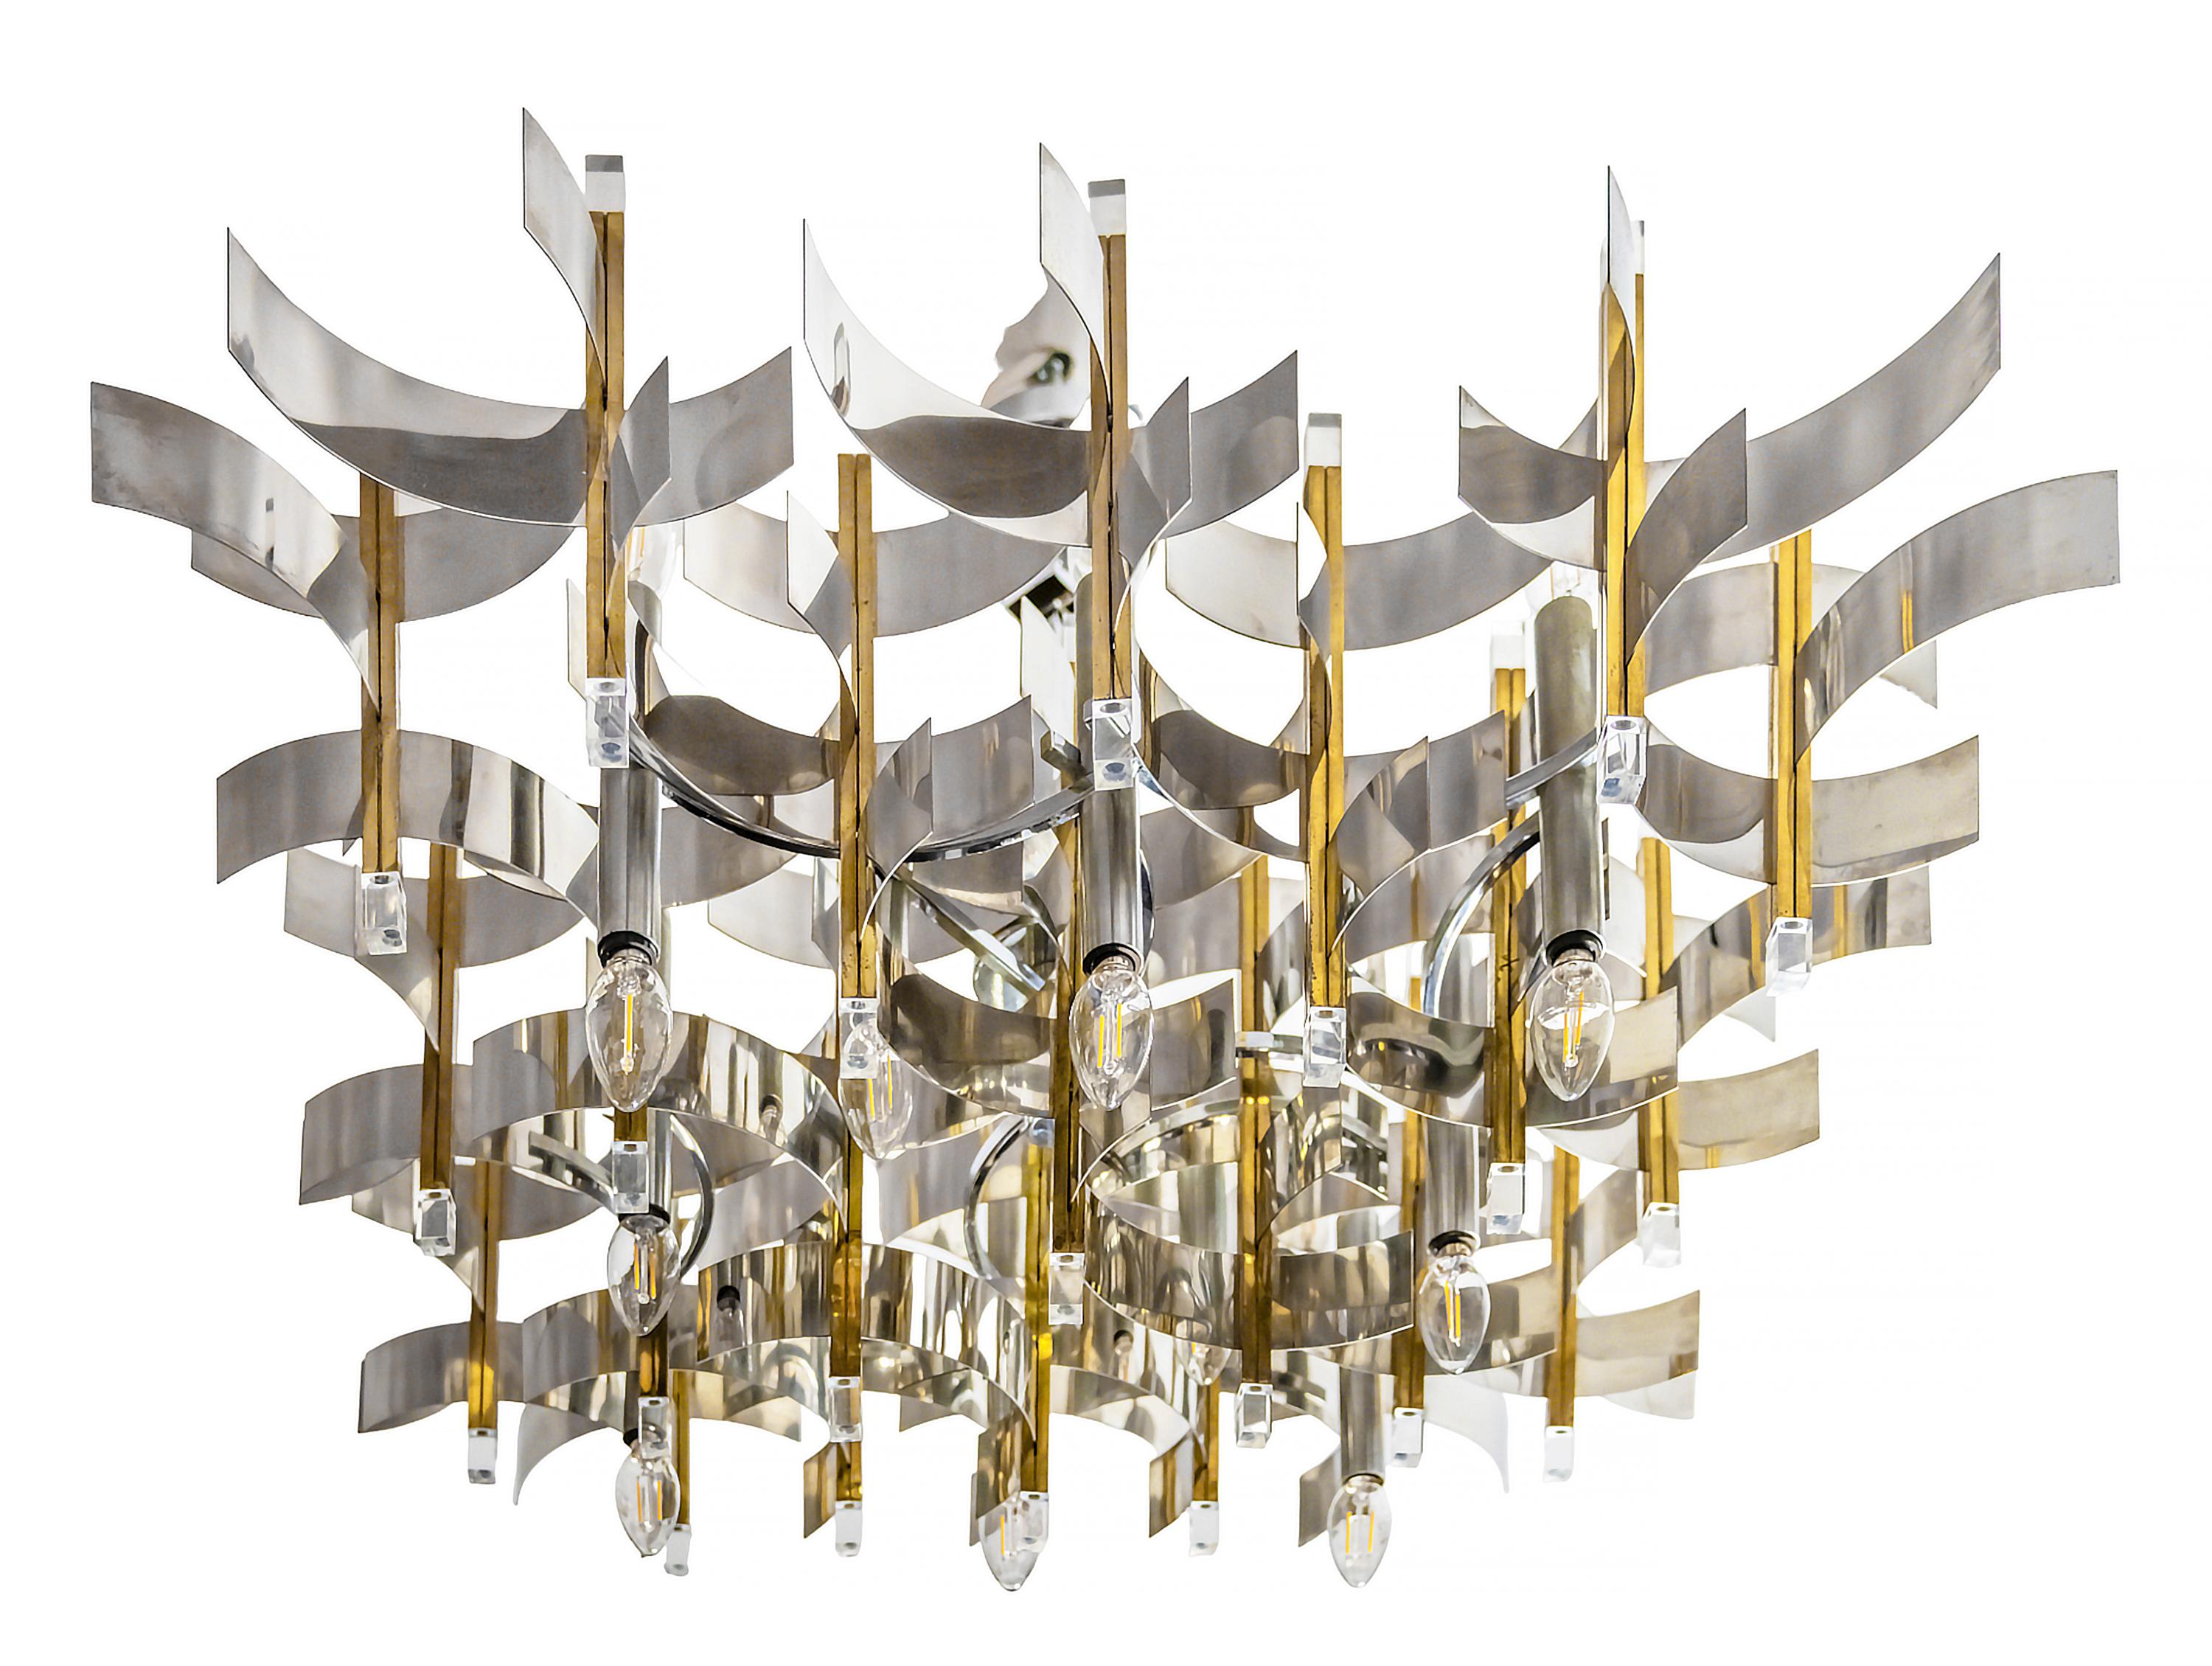 Italian midcentury chrome, brass and plexiglass chandelier designed by Gaetano Sciolari in 1970s.
The design of this chandelier is made in chrome half-round elements with brass stripes and plexiglass on their top and bottom. 
This chandelier